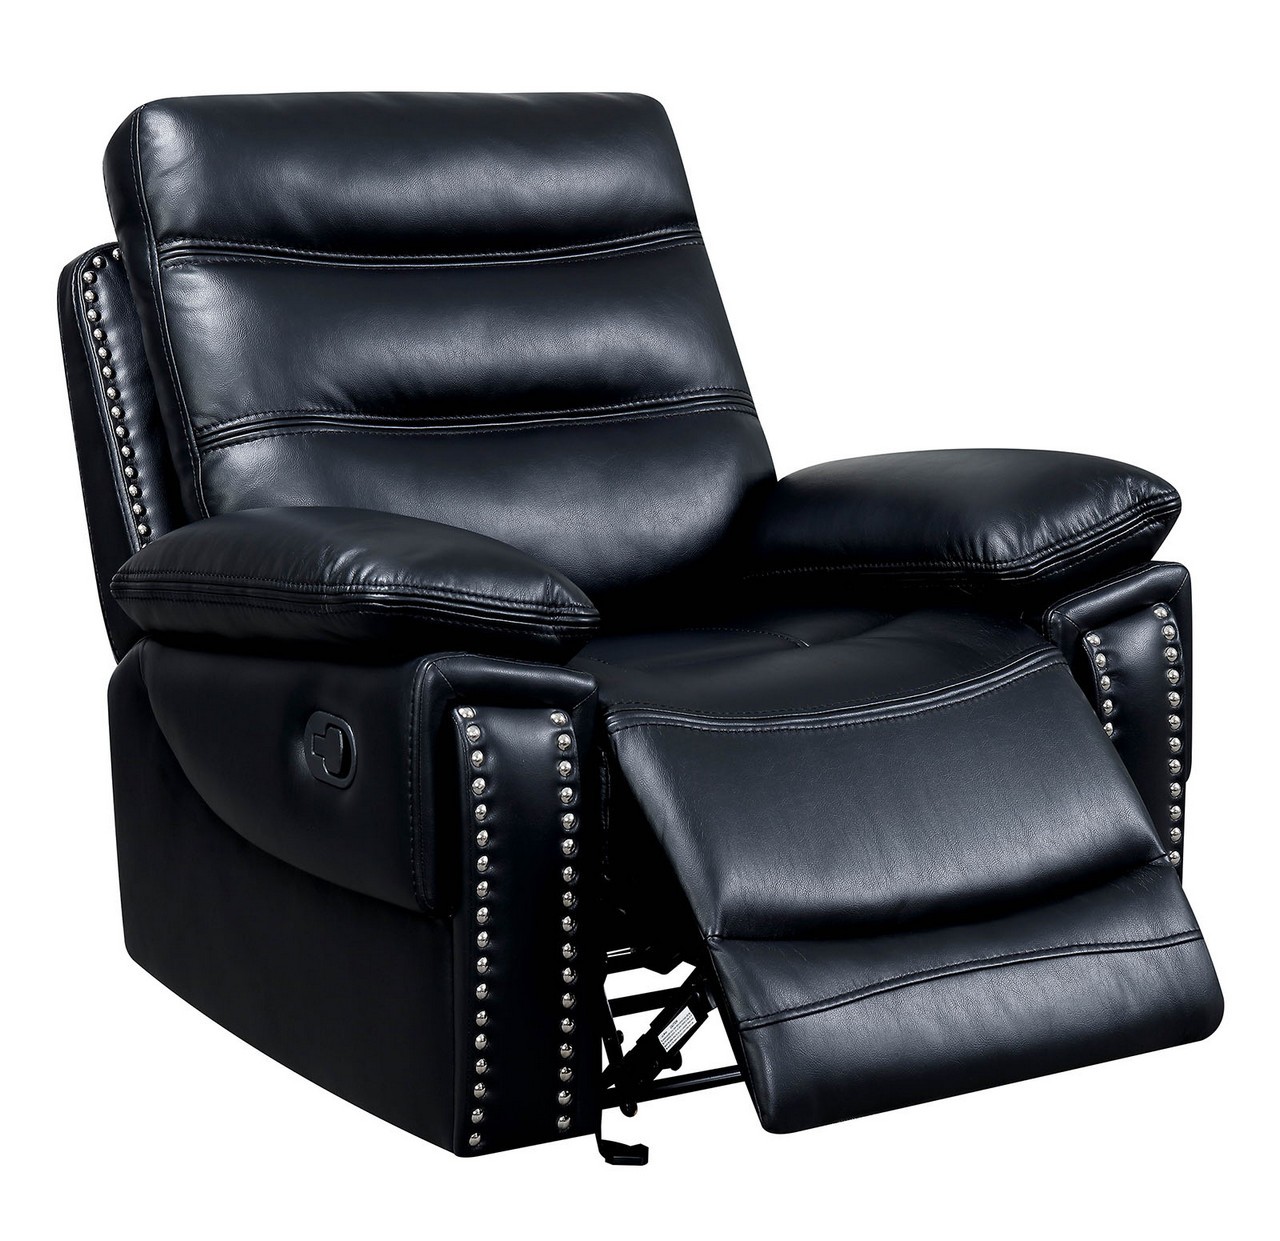 Artemis contemporary black faux leather recliner with